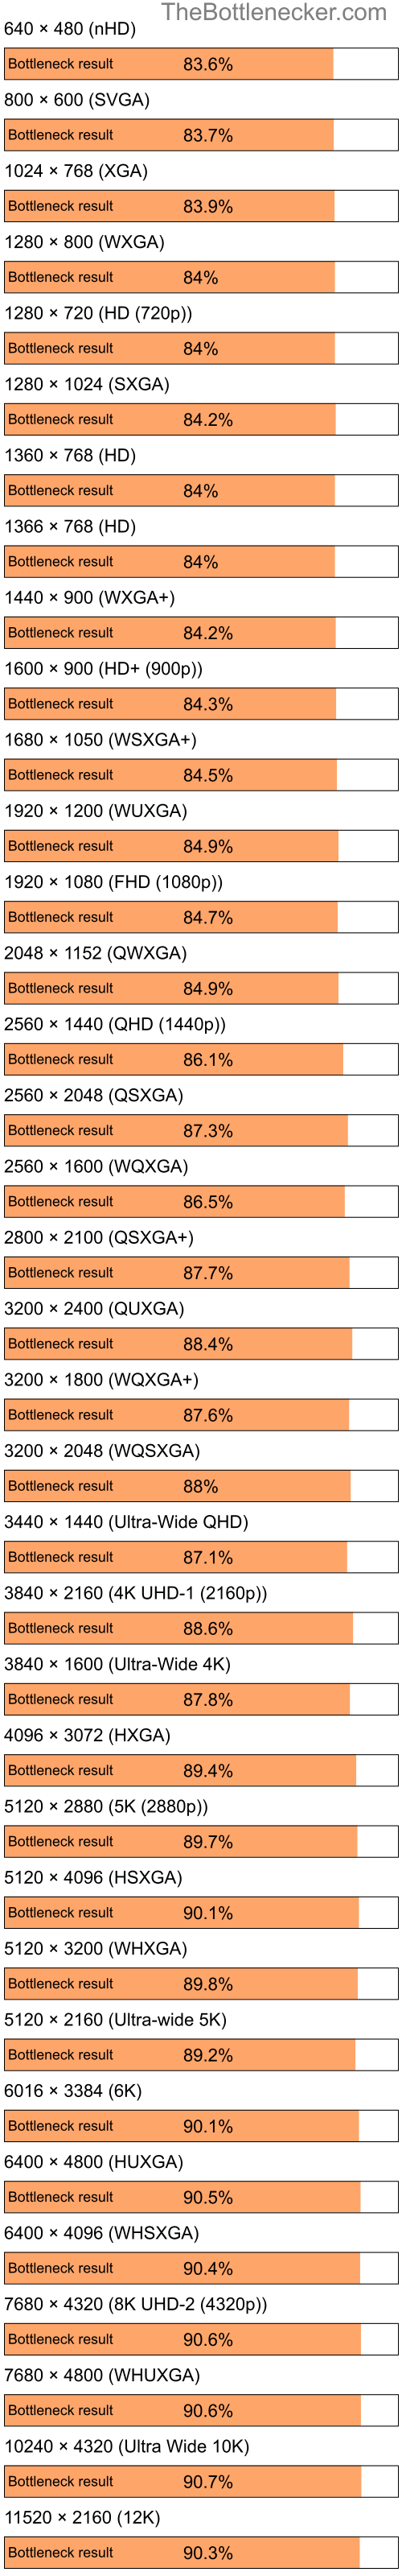 Bottleneck results by resolution for Intel Pentium 4 and AMD Radeon 9600SE in Graphic Card Intense Tasks